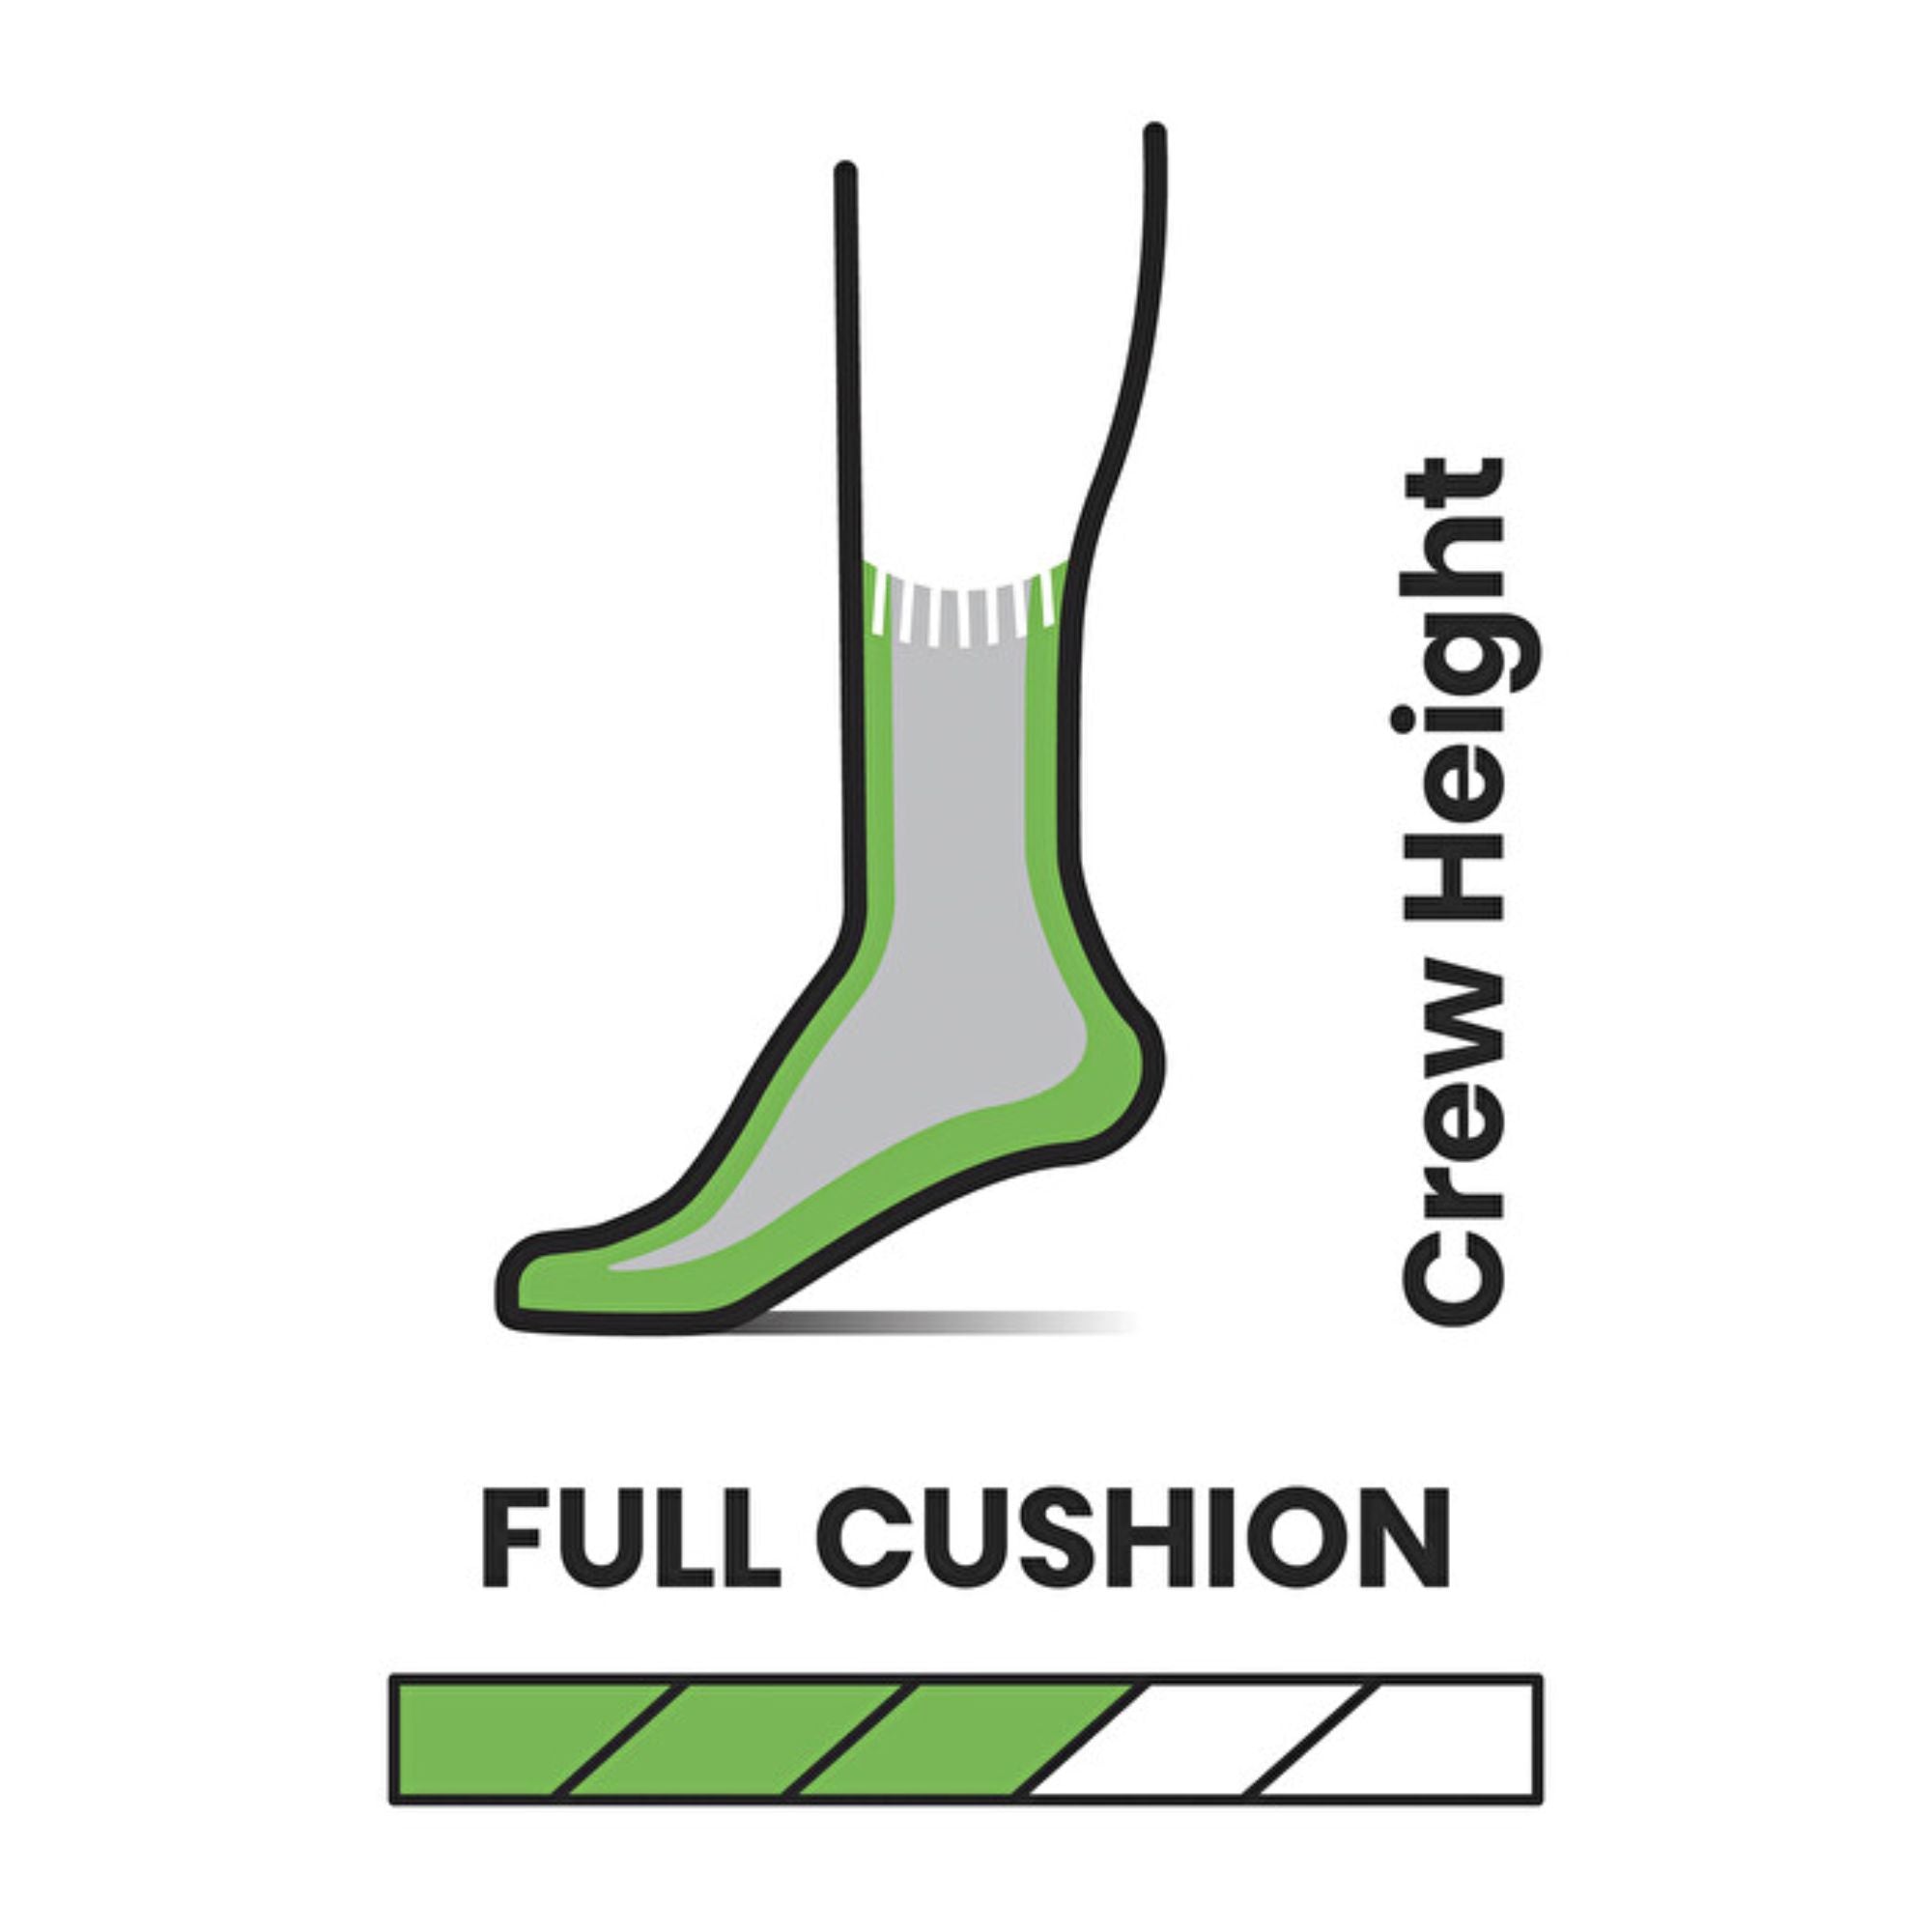 Smartwool Hike Full Cushion Crew Sock | SMARTWOOL | Portwest - The Outdoor Shop